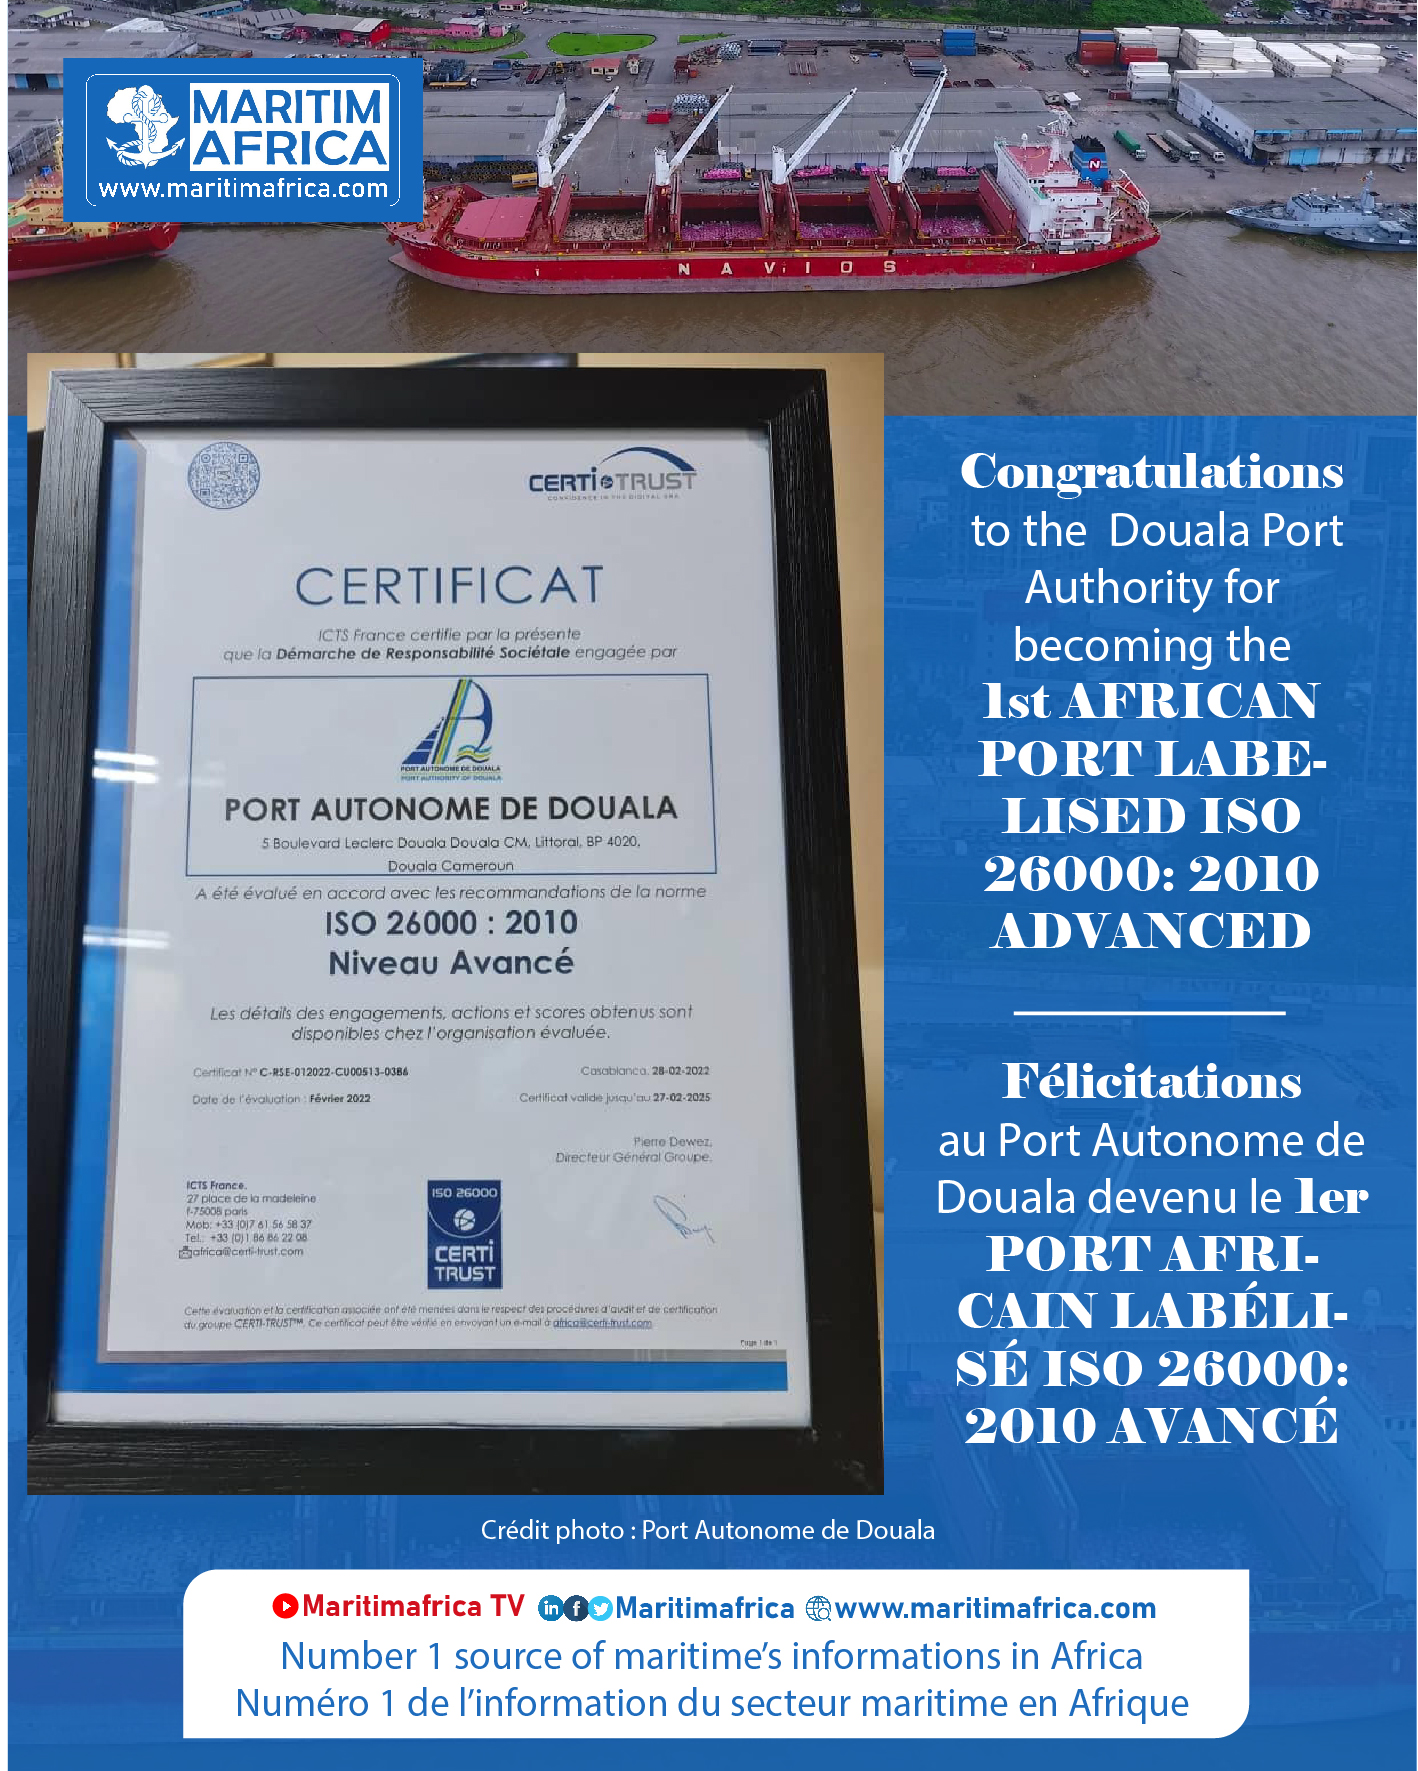 The Douala Port Authority, 1st African port labelised ISO 26000: 2010 advanced